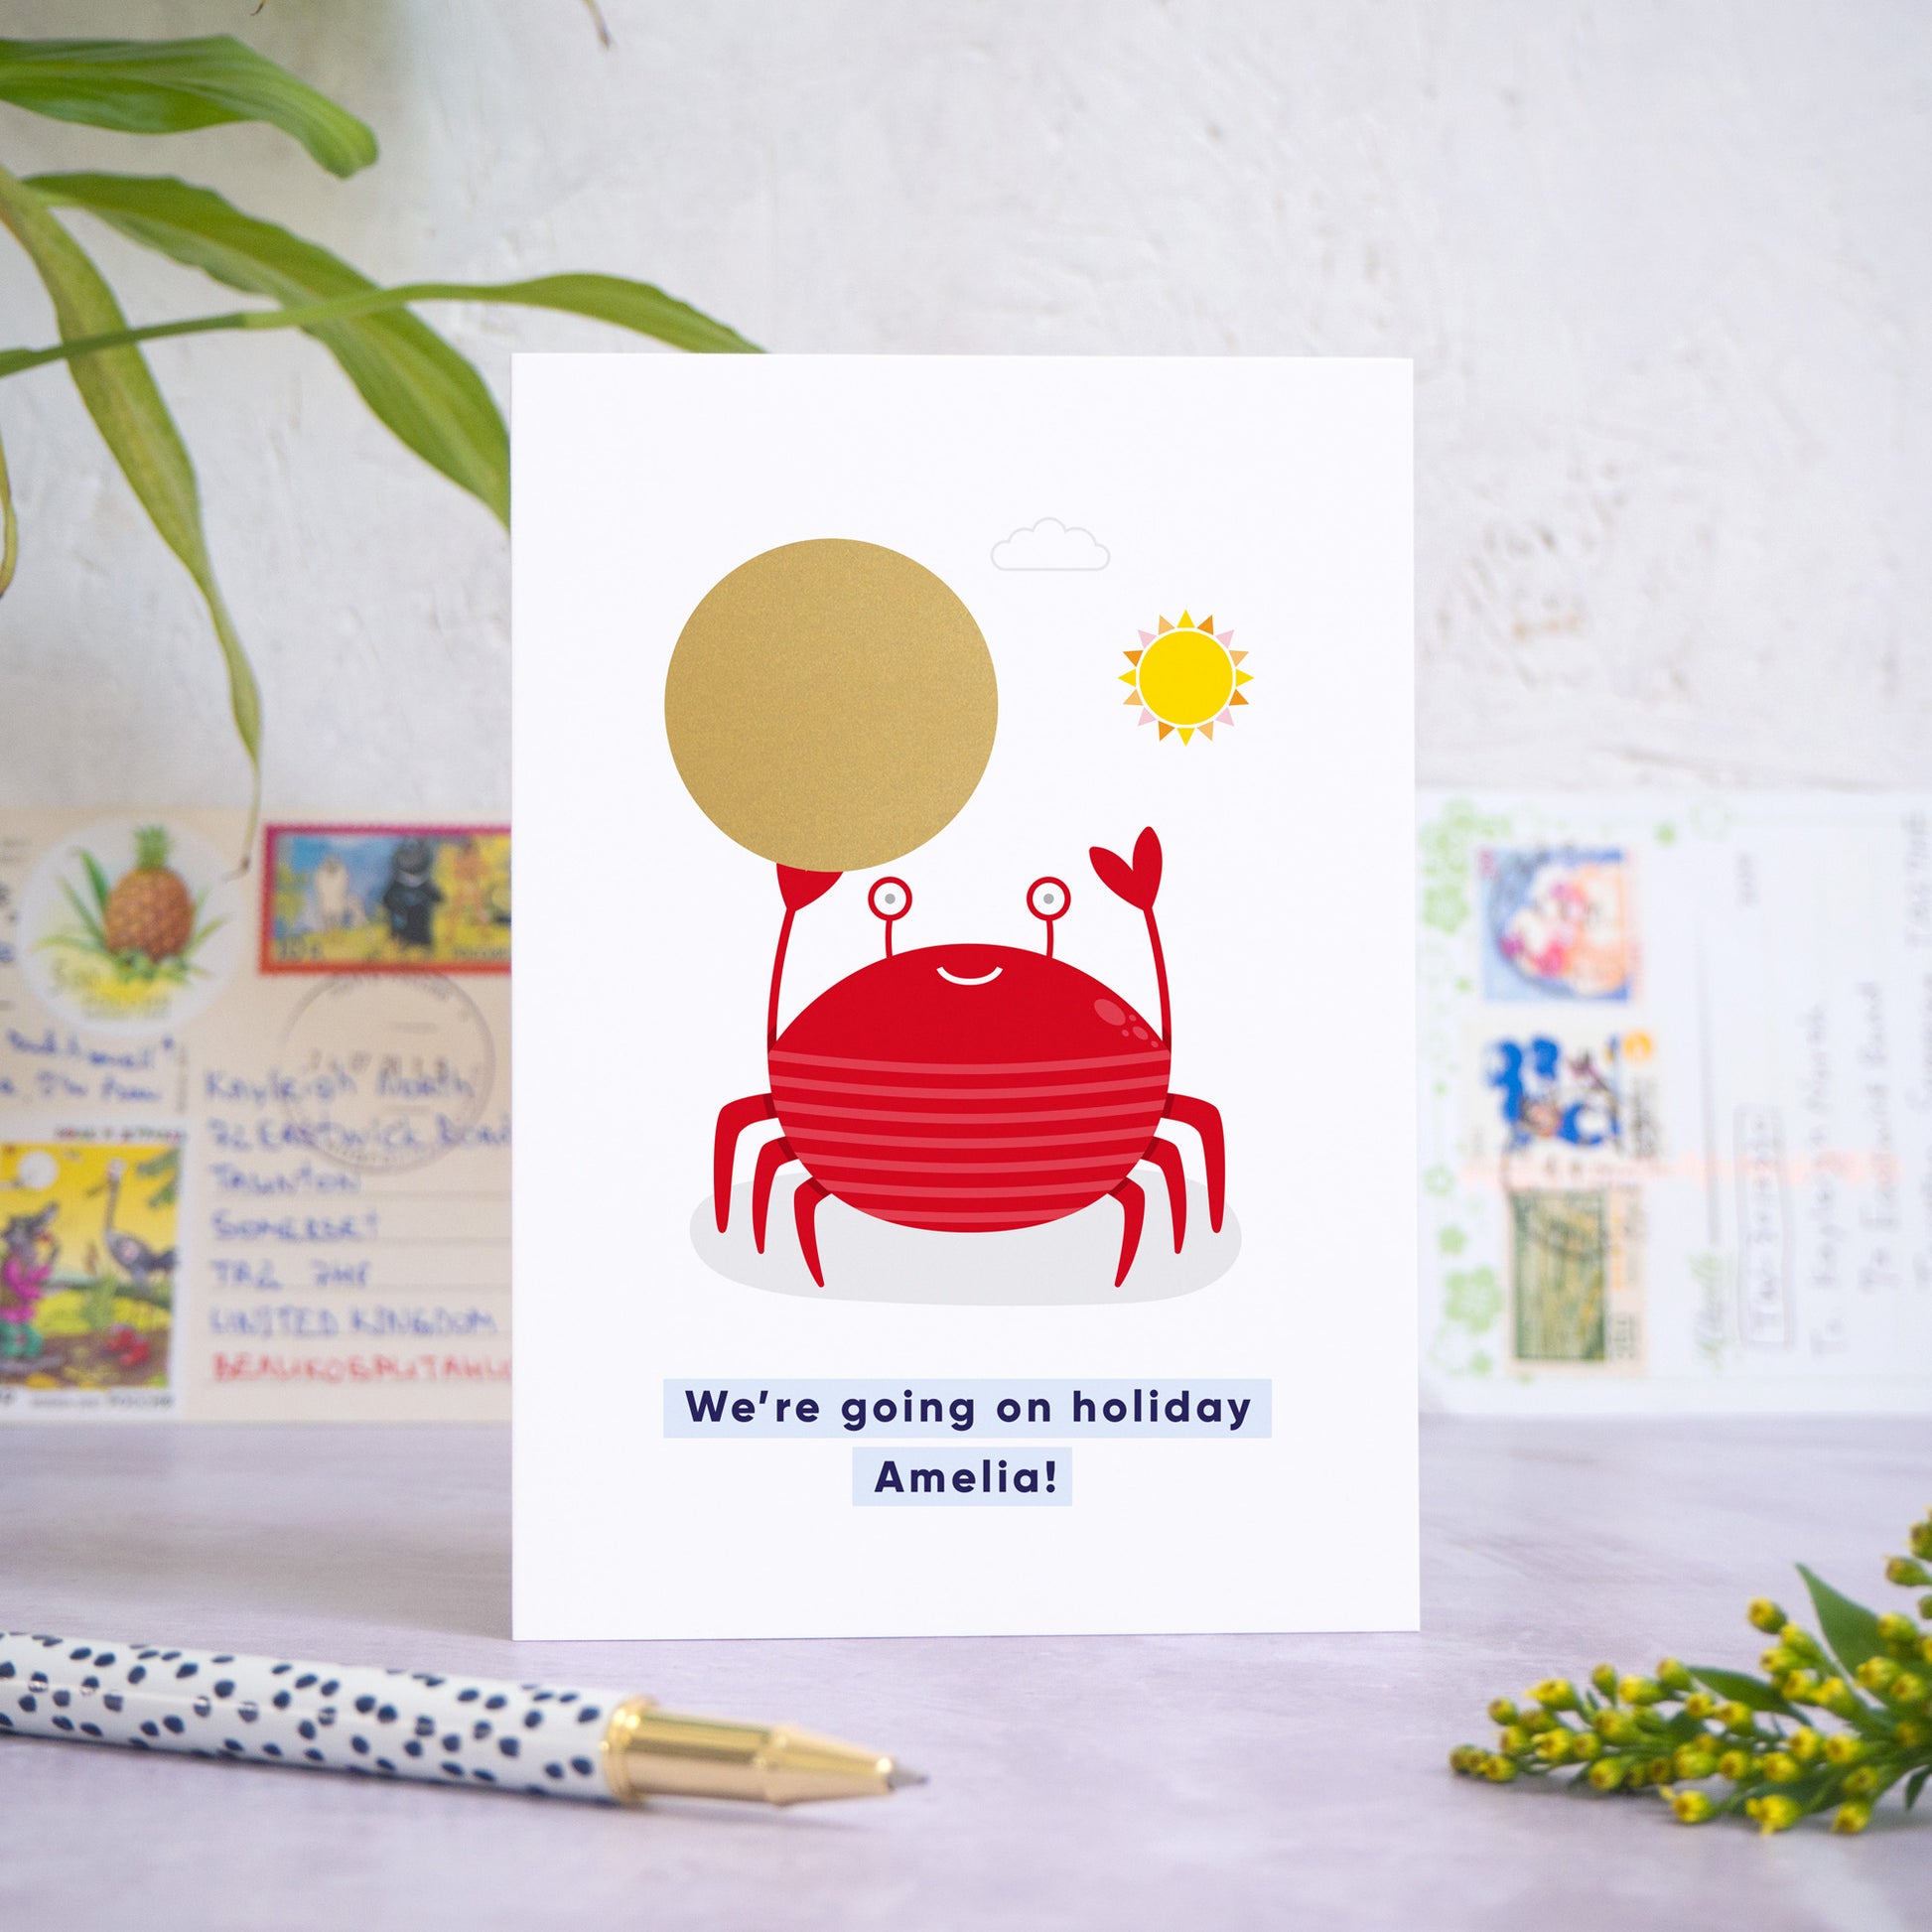 A seaside holiday reveal scratch card featuring a friendly red crab holding the gold scratch panel. The gold panel has not yet been scratched off to reveal the holiday destination. Beneath the crab illustration the text reads: “we’re going on holiday Amelia”. The card is standing on a grey surface with postcards in the background and a pen and foliage in the foreground.